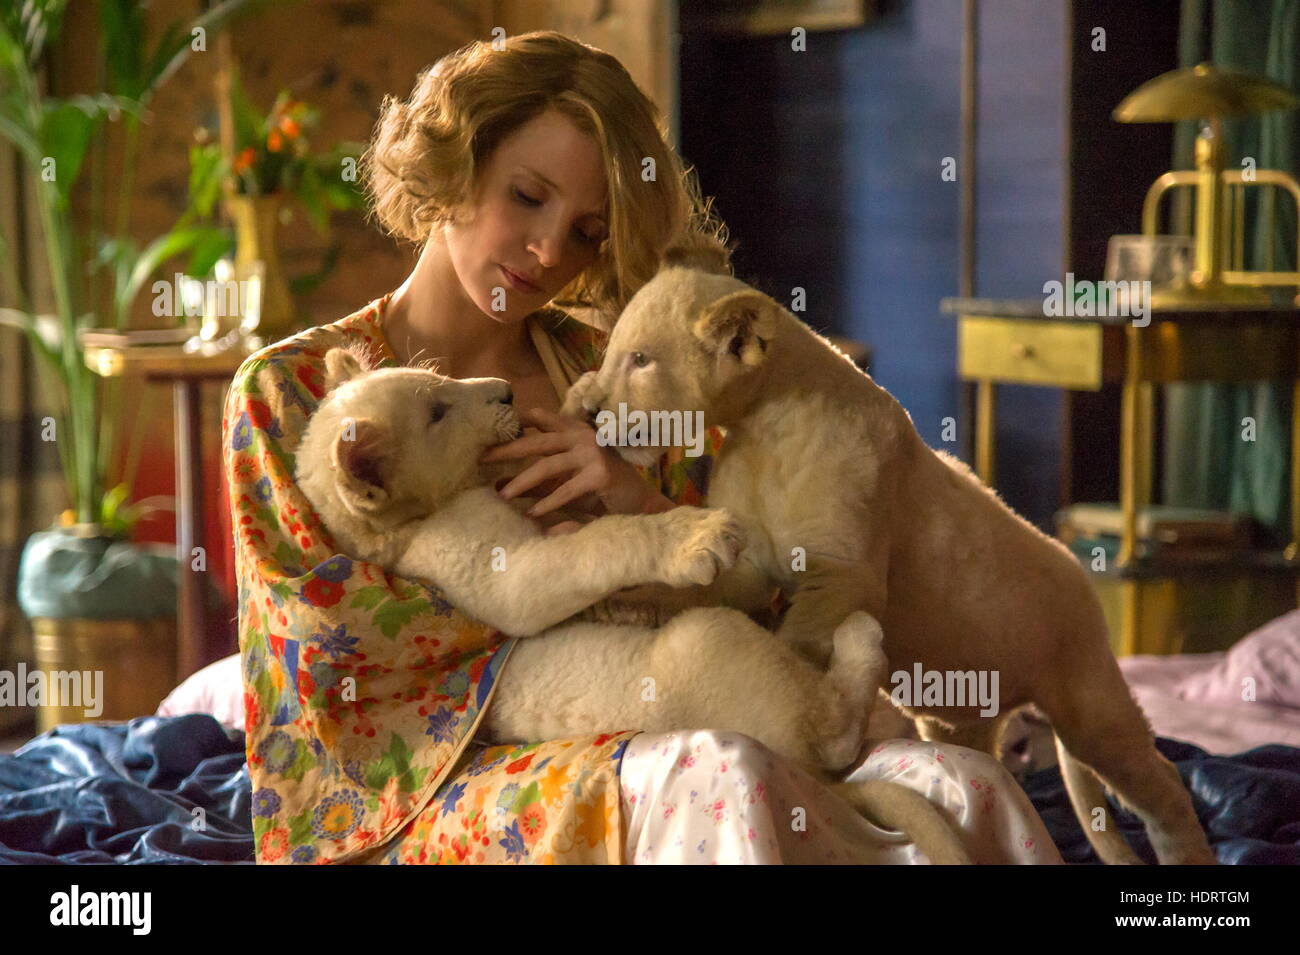 RELEASE DATE: March 3, 2017 TITLE: The Zookeeper's Wife STUDIO: Focus Features DIRECTOR: Niki Caro PLOT: The Zookeeper's Wife tells the account of keepers of the Warsaw Zoo, Antonina and Jan Zabinski, who helped save hundreds of people and animals during the Nazi invasion STARRING: Jessica Chastain as Antonina Zabinski (Credit: c Focus Features/Entertainment Pictures/) Stock Photo